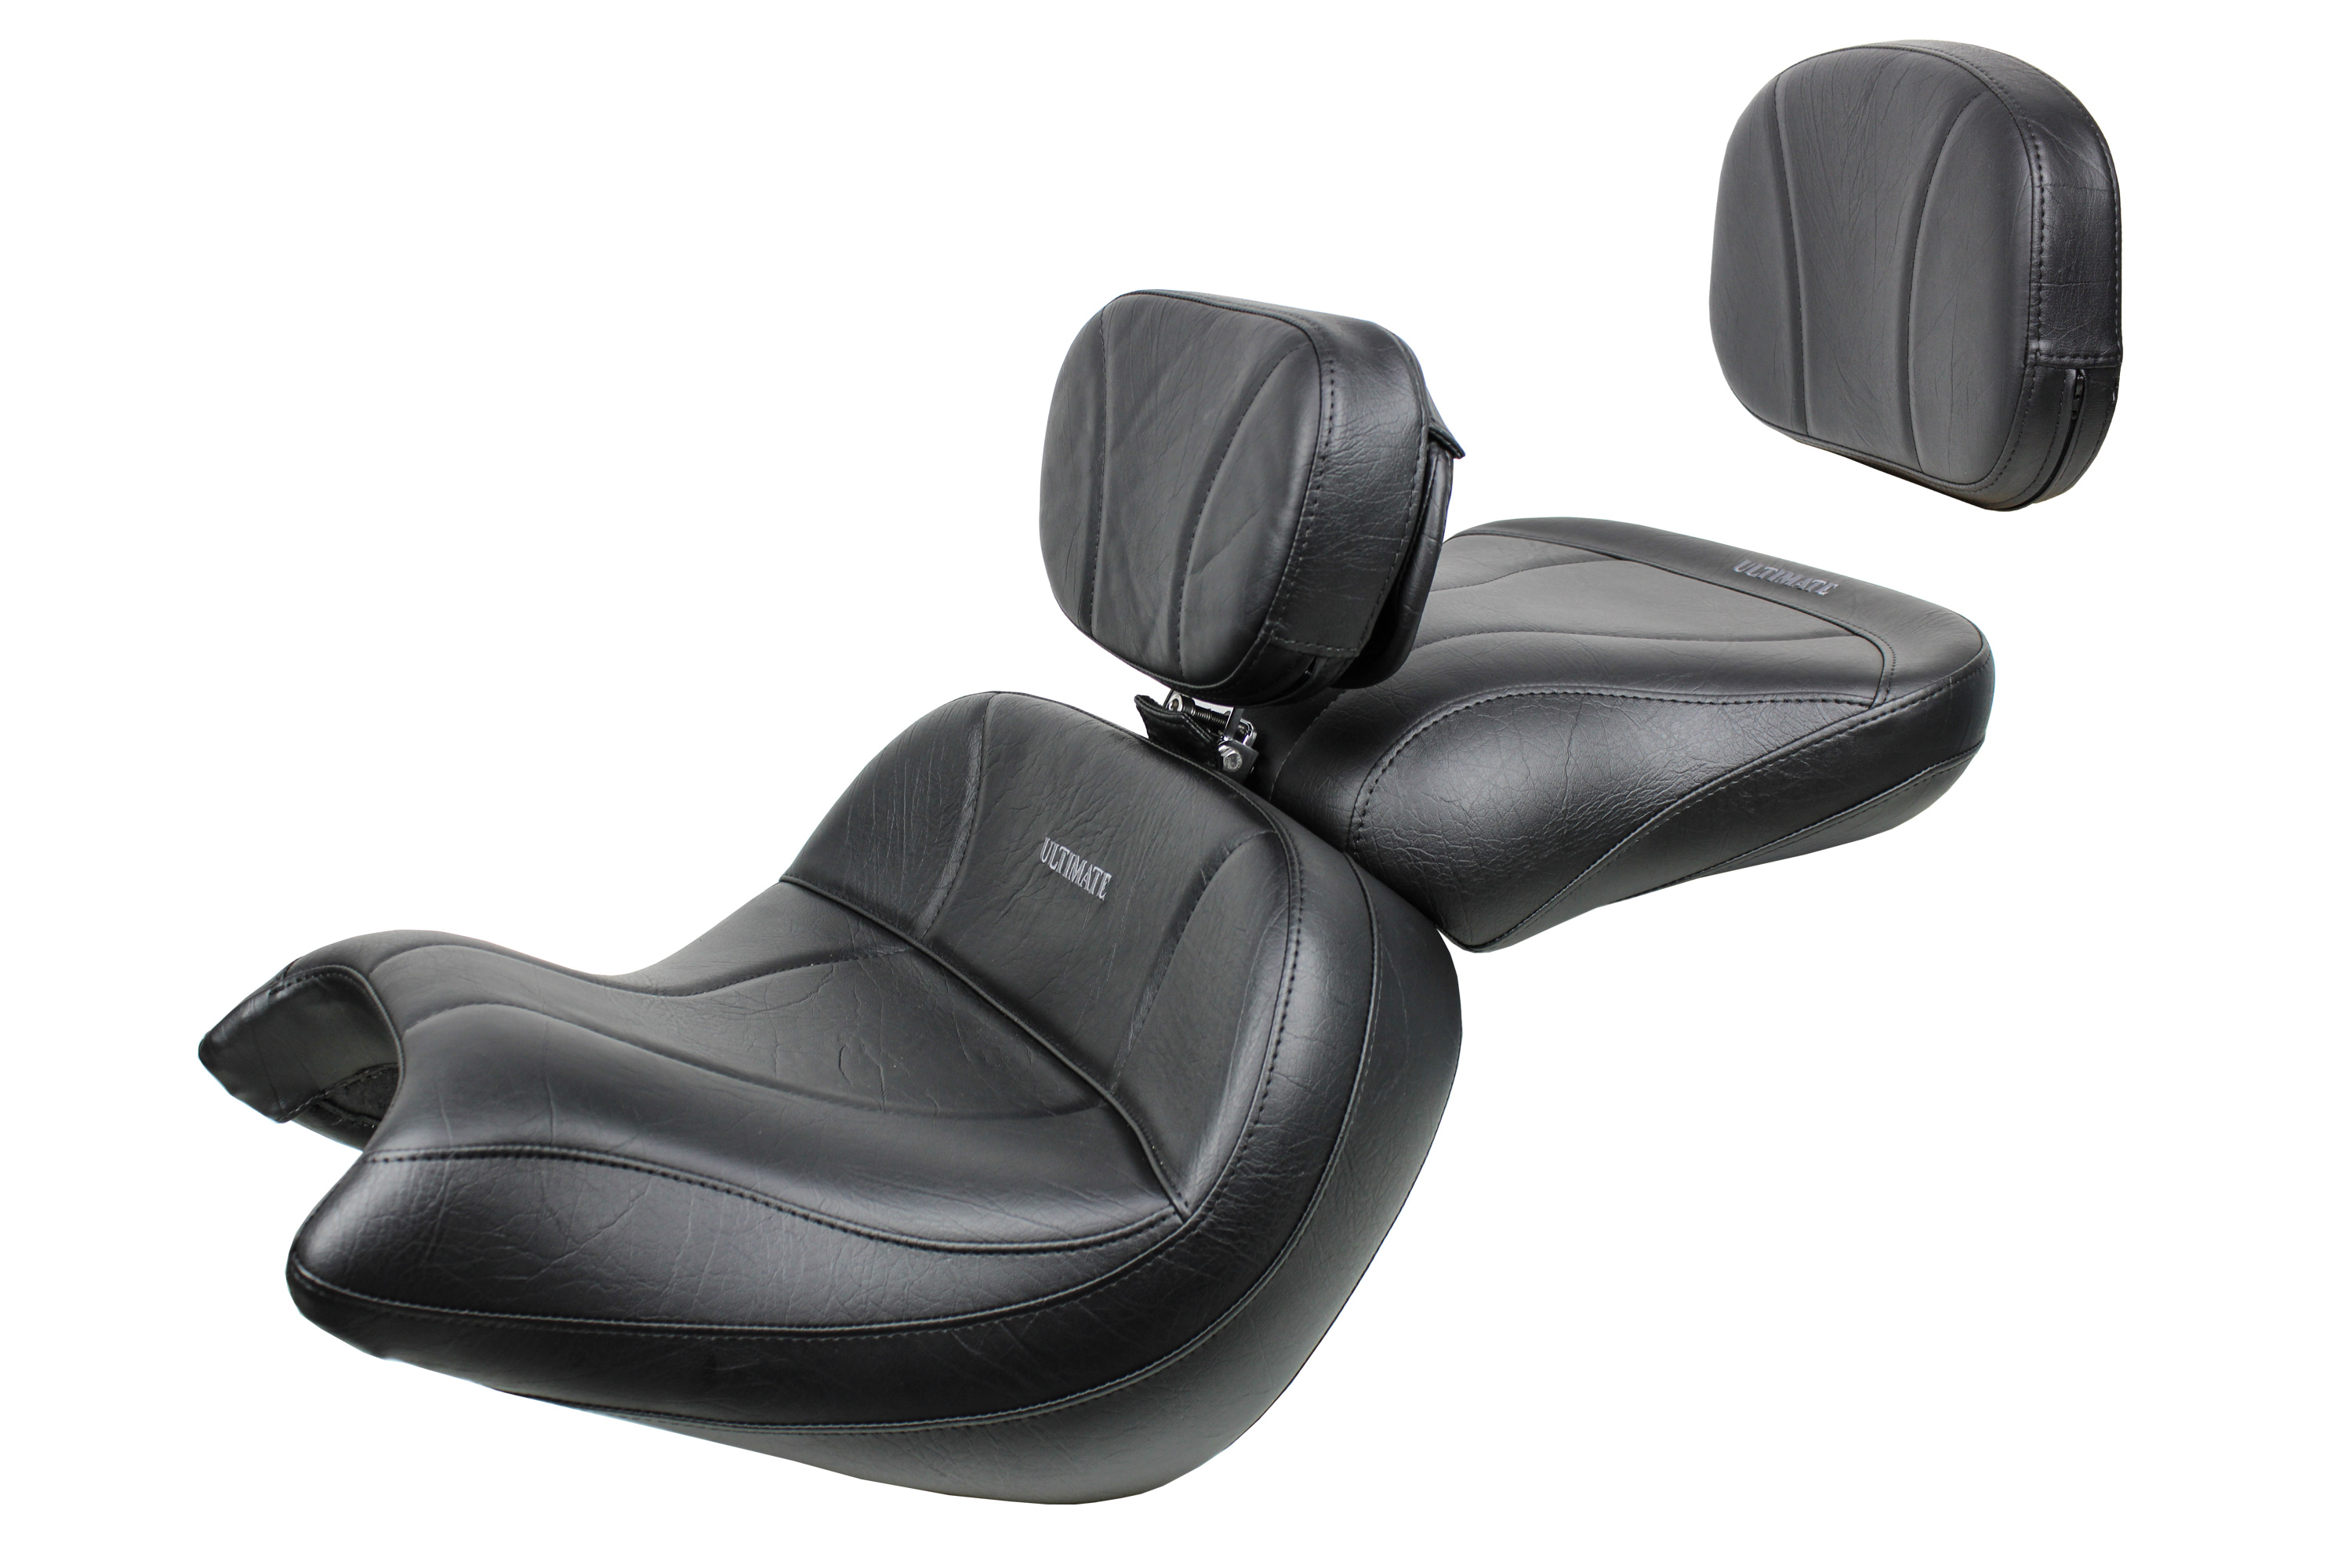 VTX 1800 C Lowrider Seat, Passenger Seat, Driver Backrest and Sissy Bar Pad - Plain or Studded